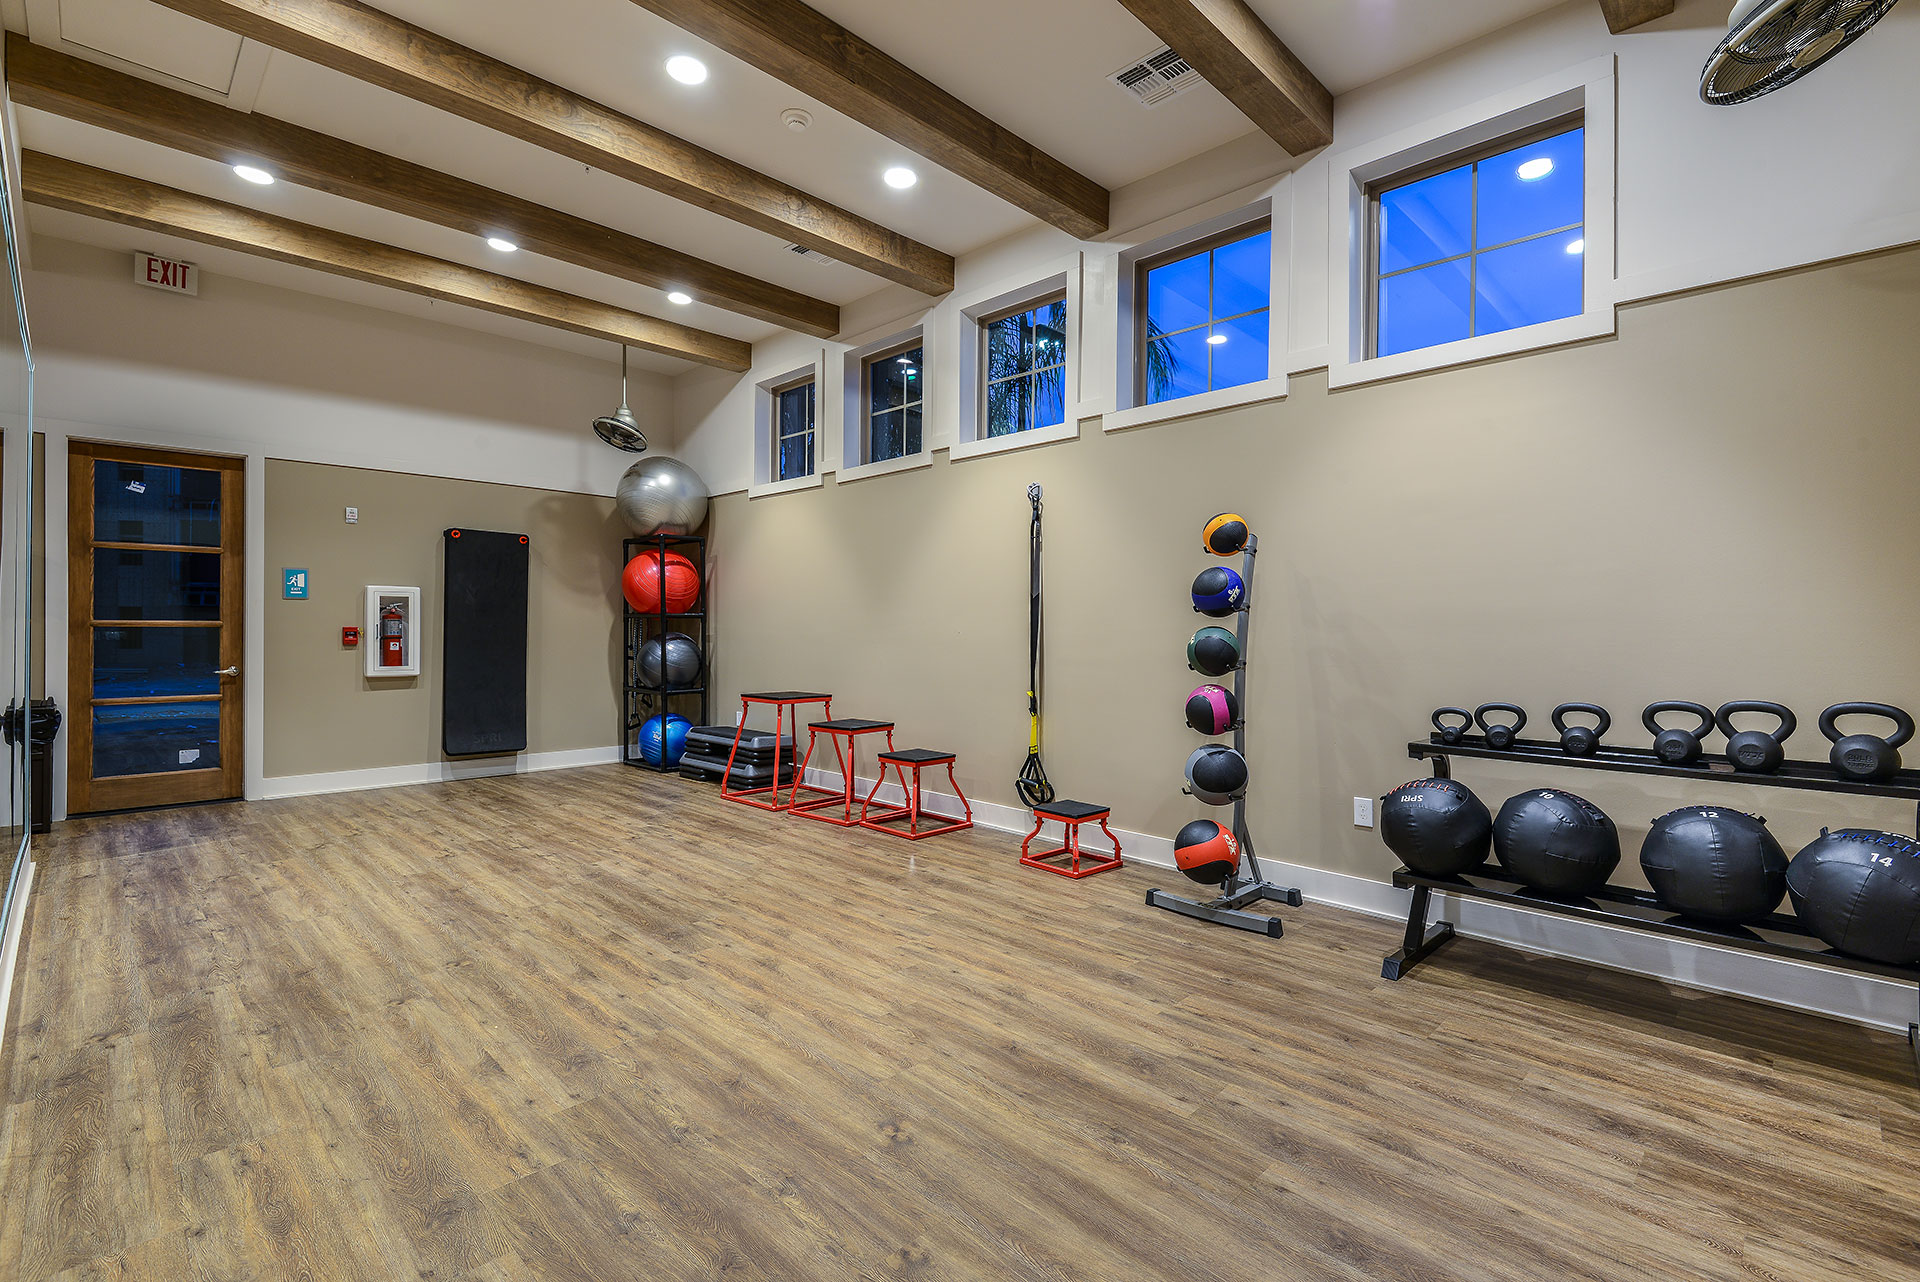 Workout room with exercise balls and wood floors